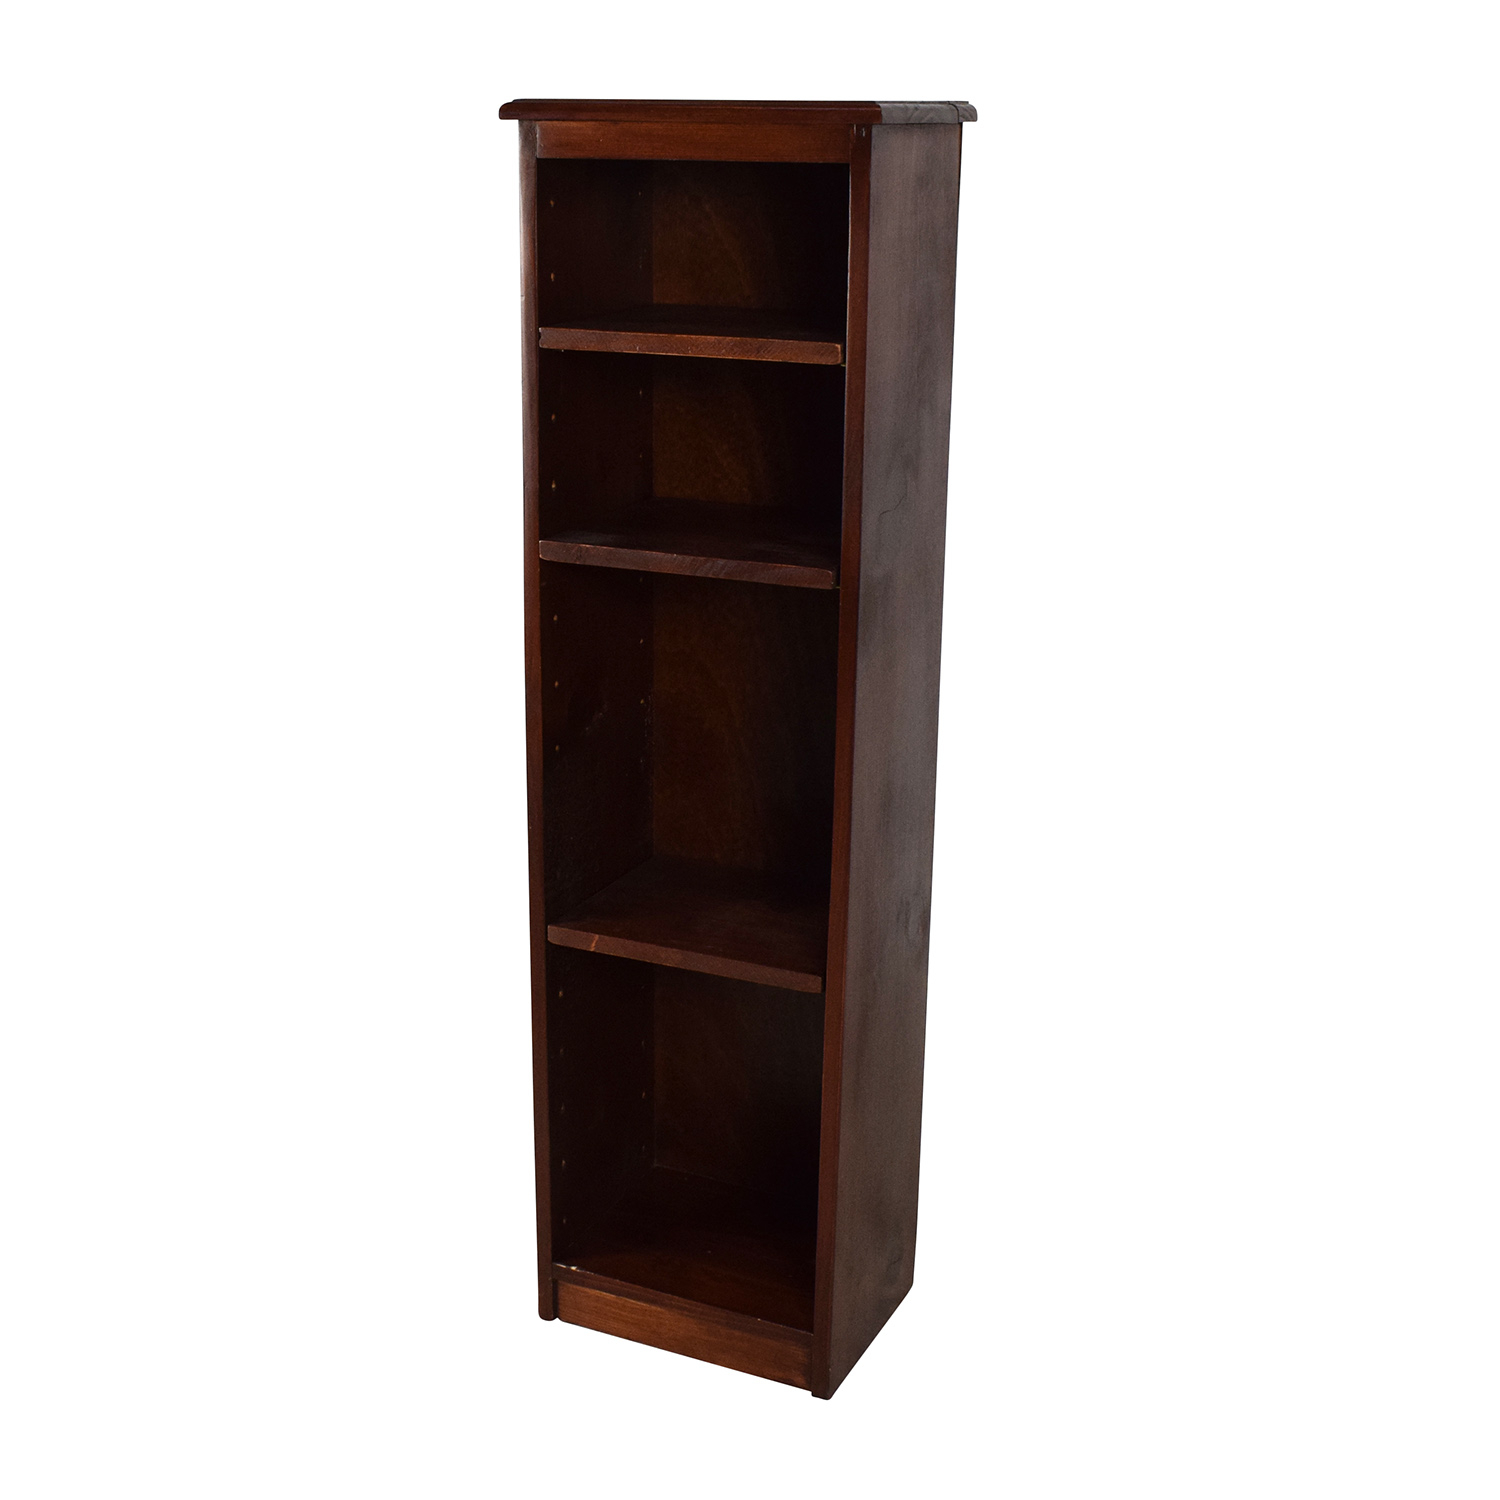 77 Off Gothic Cabinet Craft Gothic Furniture Small Wooden Bookshelf Storage in proportions 1500 X 1500